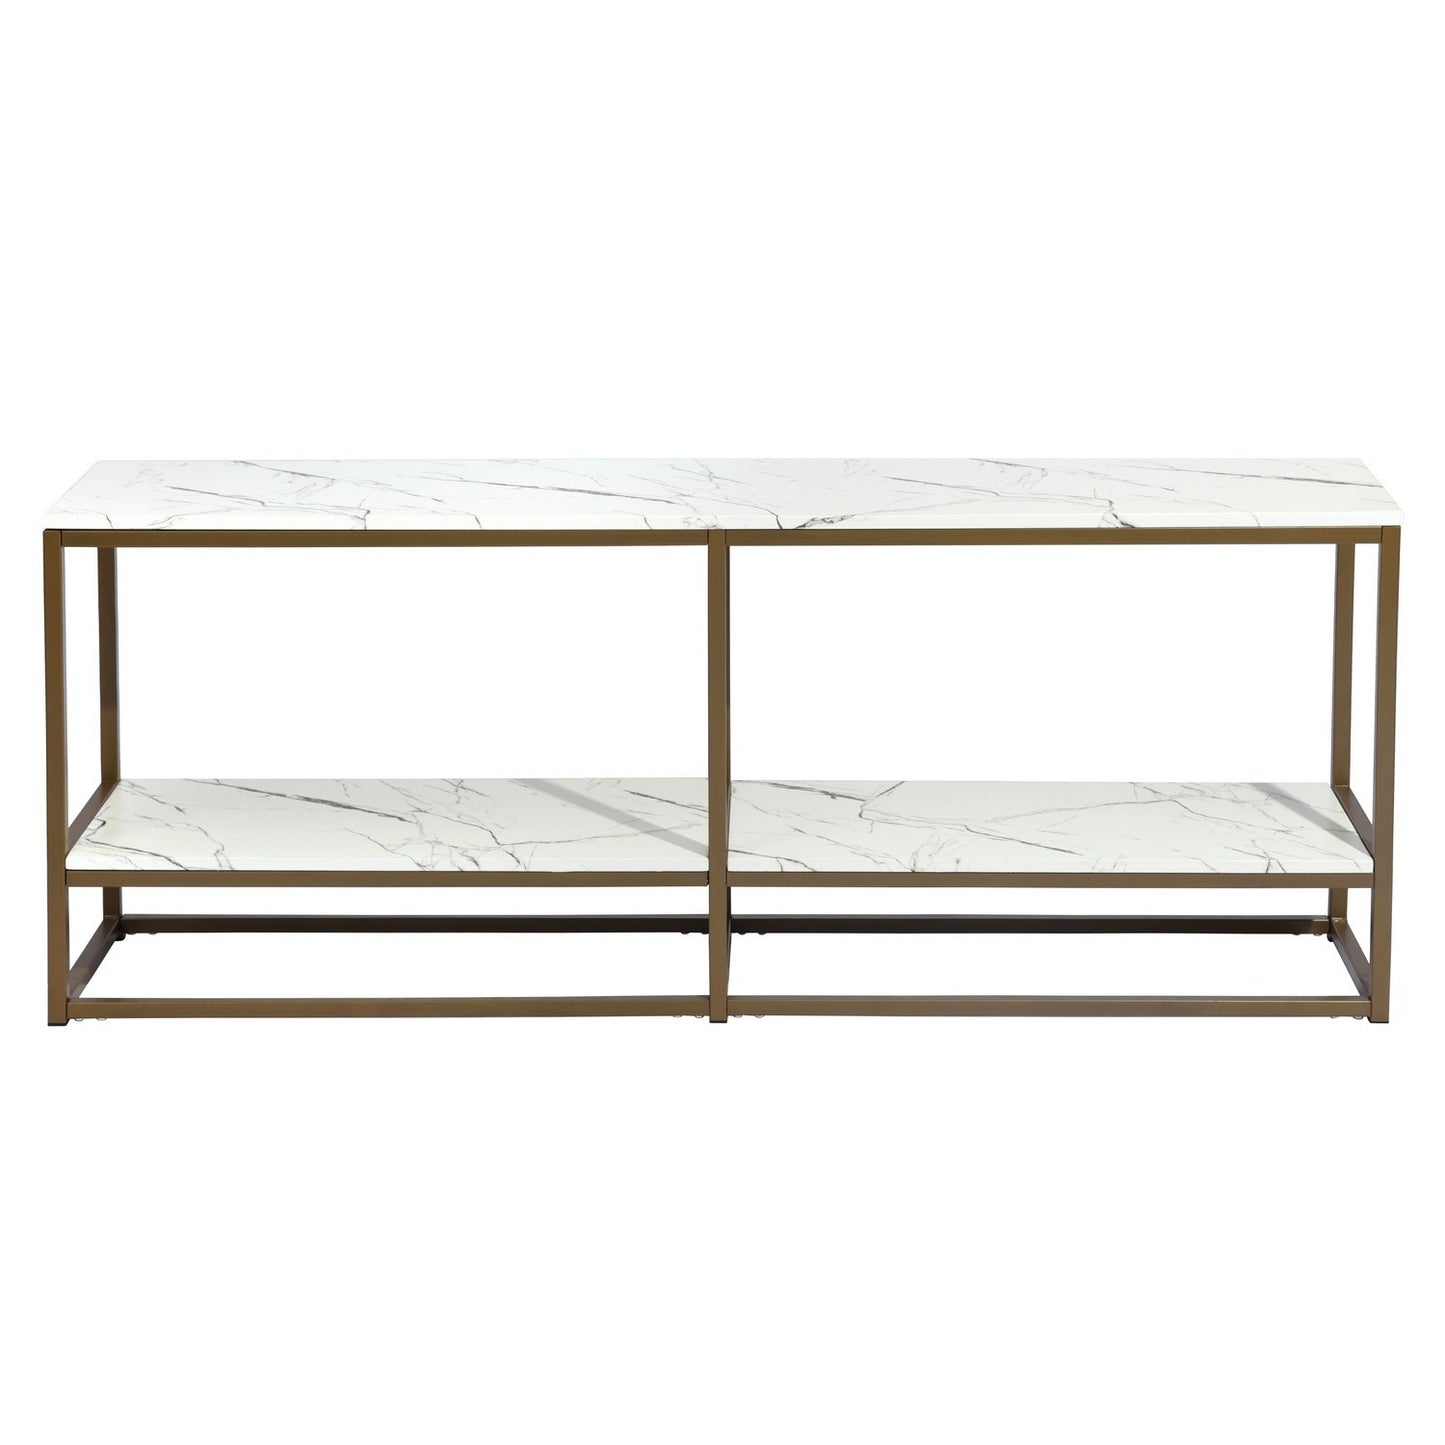 59.8 inch White Marble Gold Frame TV STAND With Storage